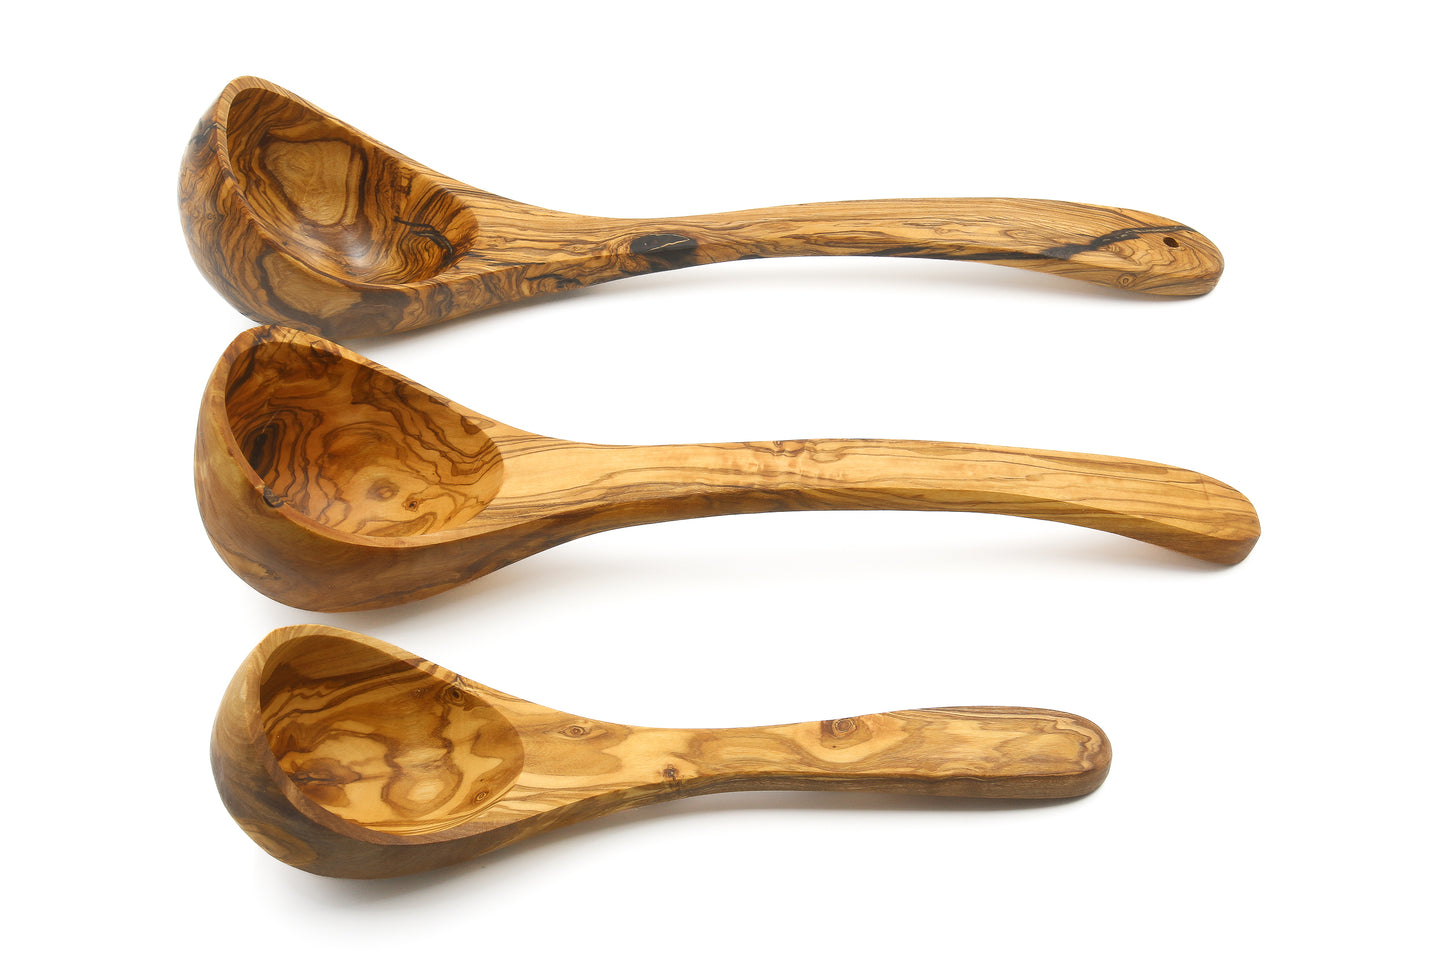 Olive wood soup serving ladle with a timeless design